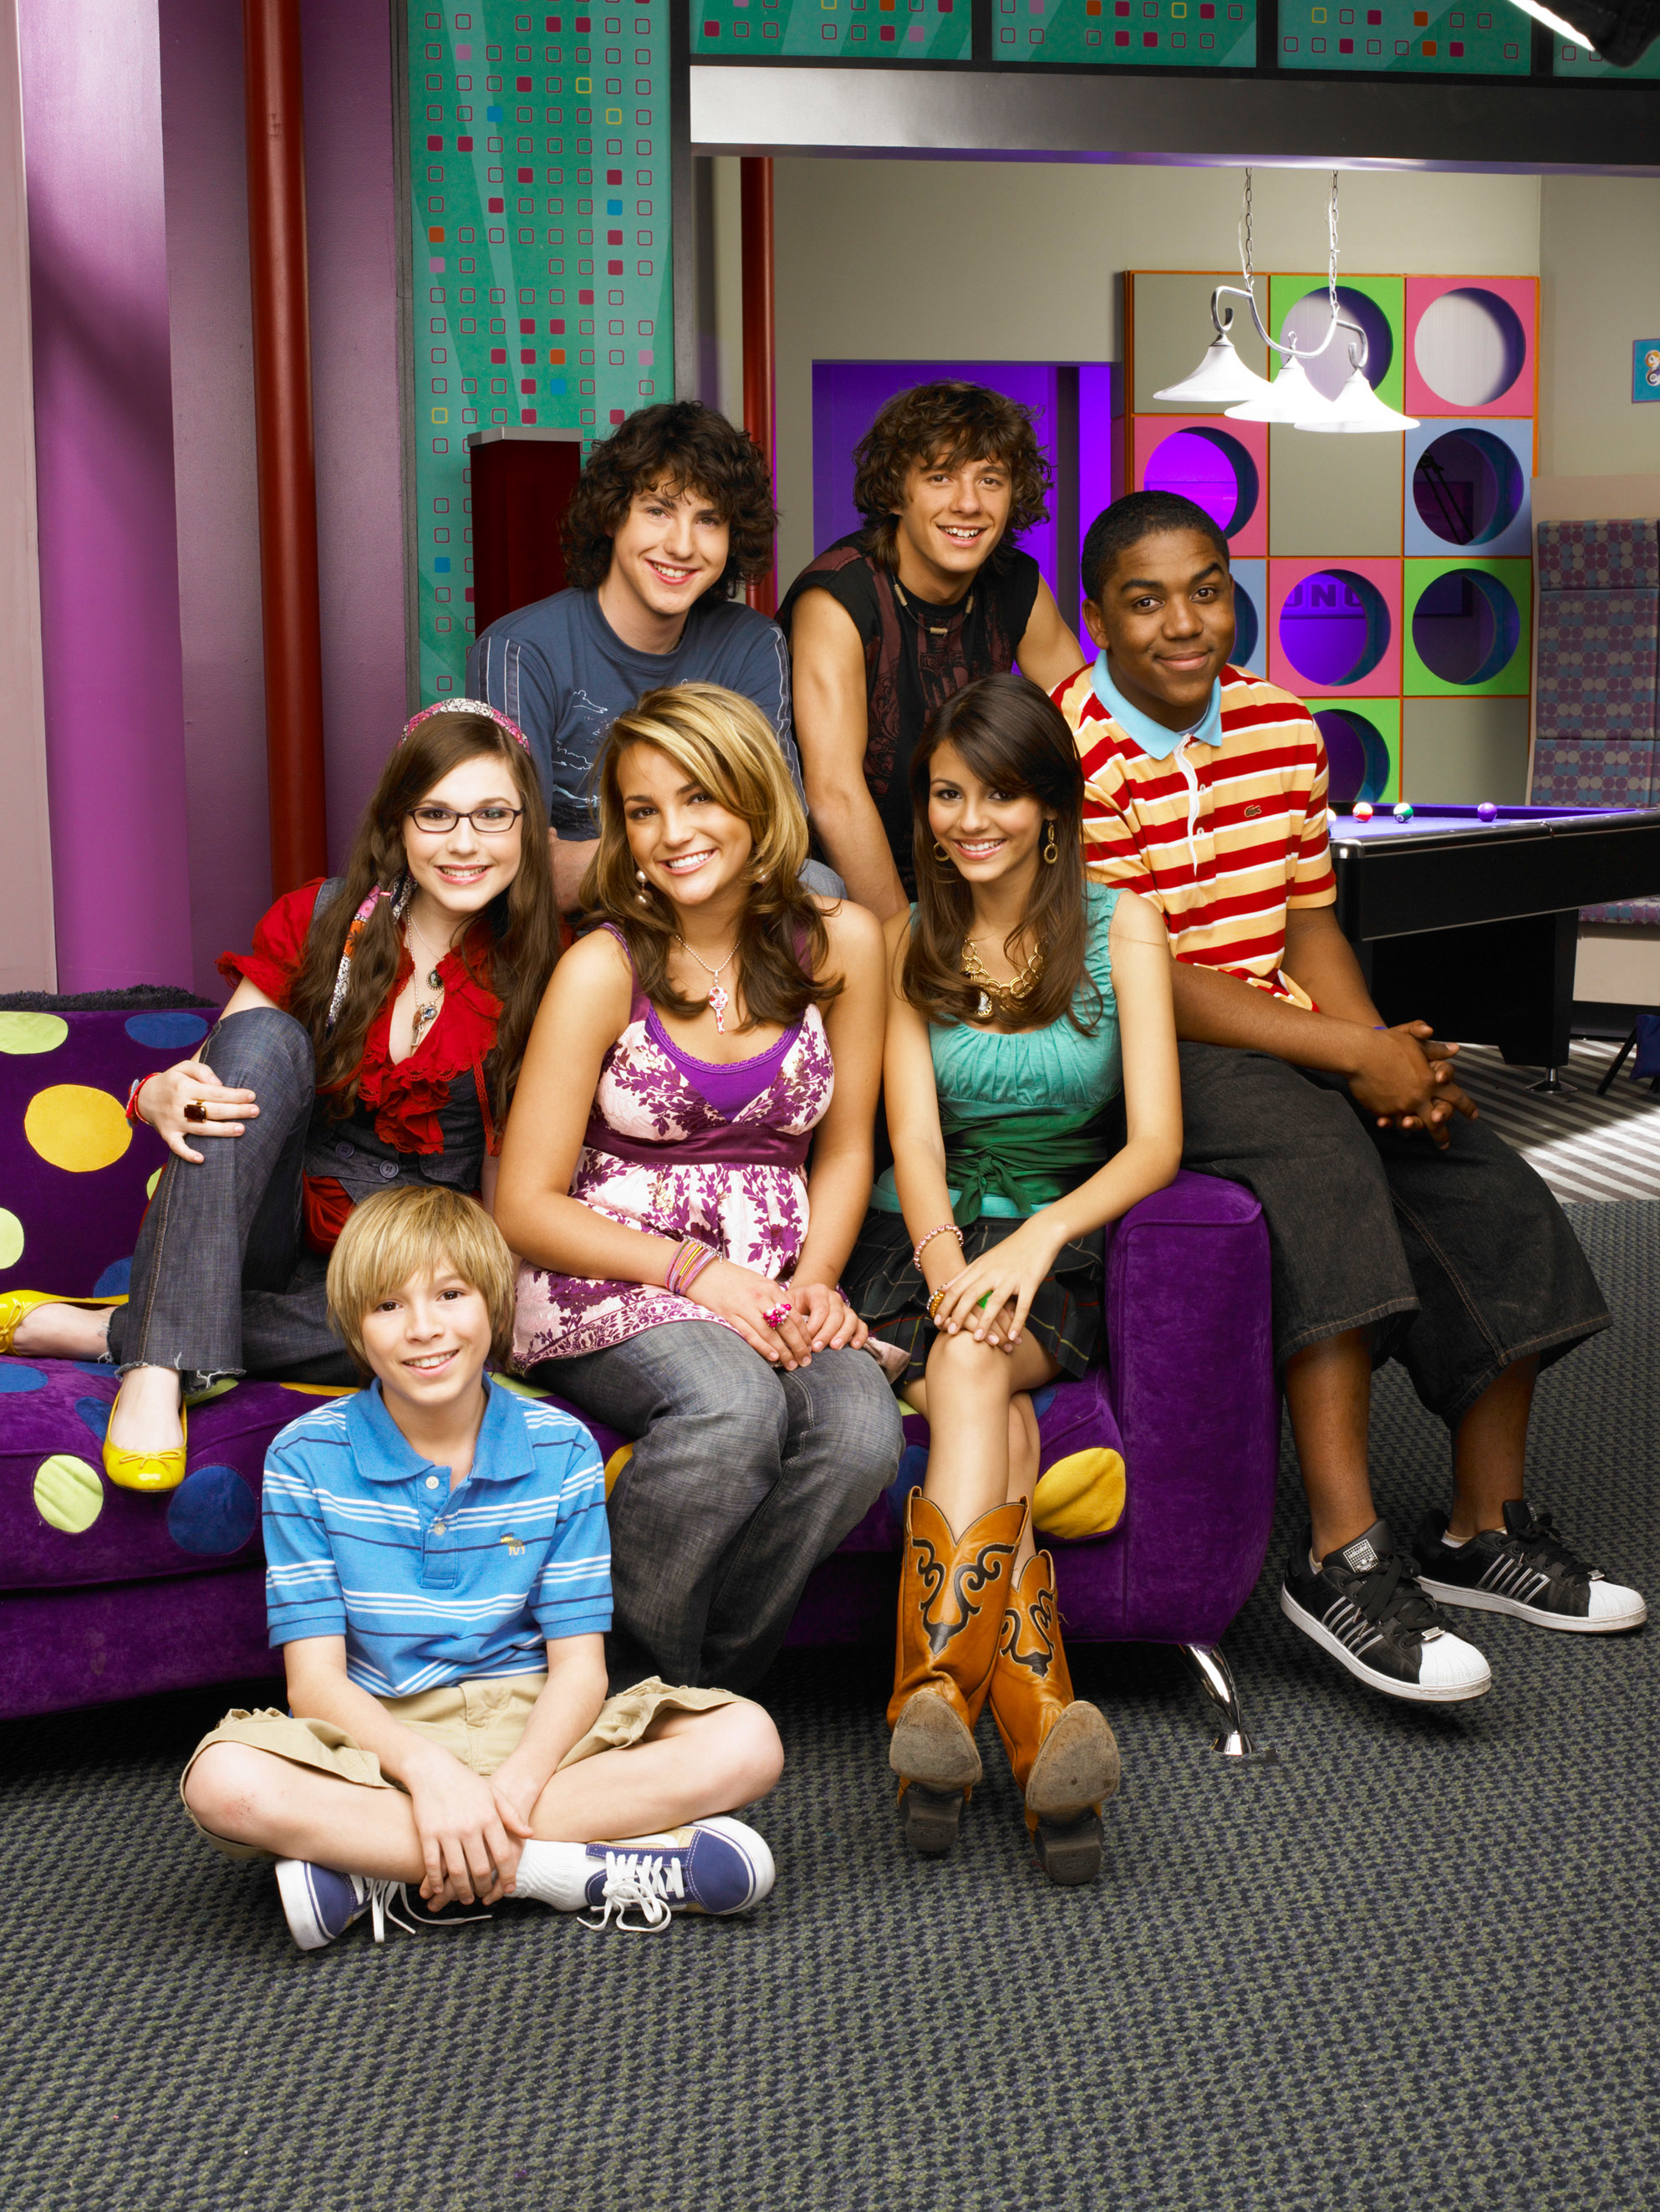 Seven cast members of Zoey 101 posing together on a set with colorful backgrounds and modern furniture